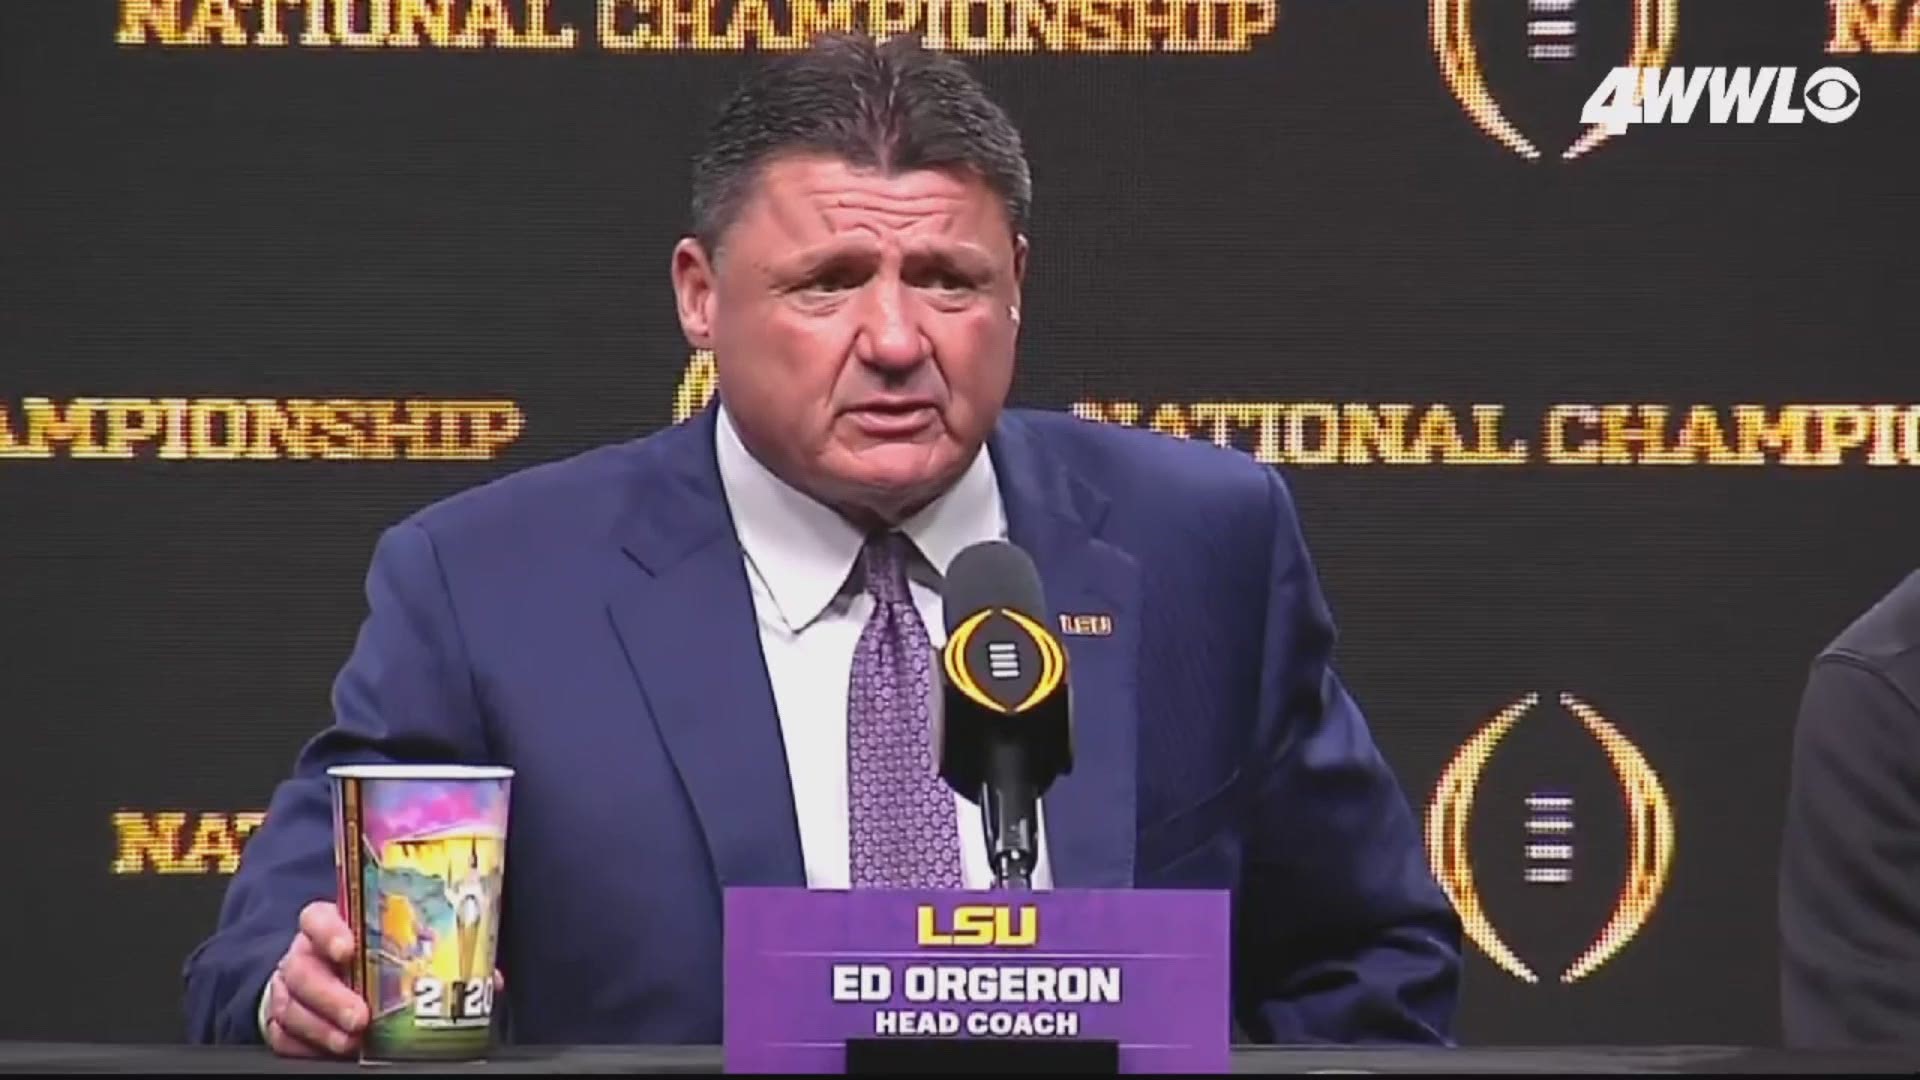 Coach Ed Orgeron talks about his relationship with Dwyane "The Rock" Johnson that started at the University of Miami. The Rock voiced a LSU hype video this week.